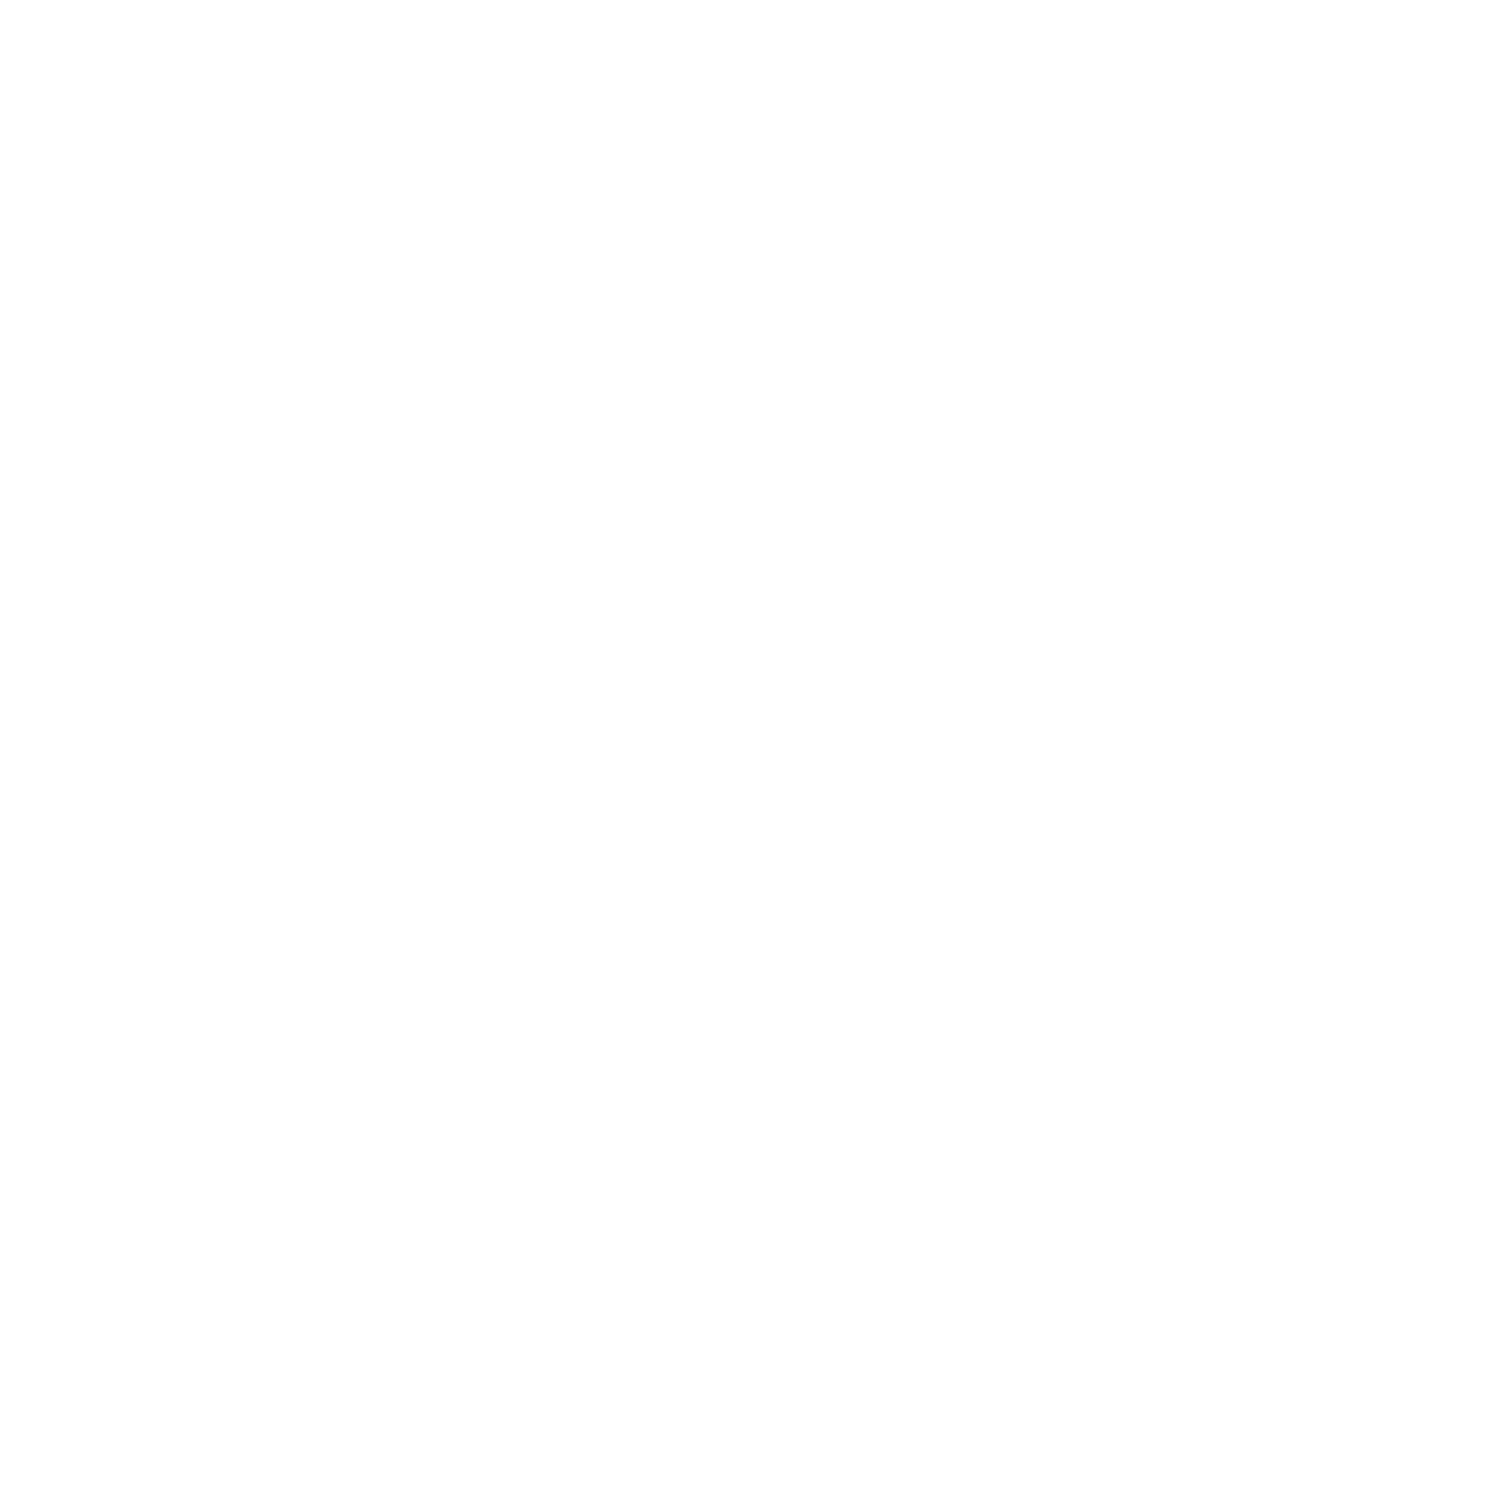 Industry Innovation and Infraestructure